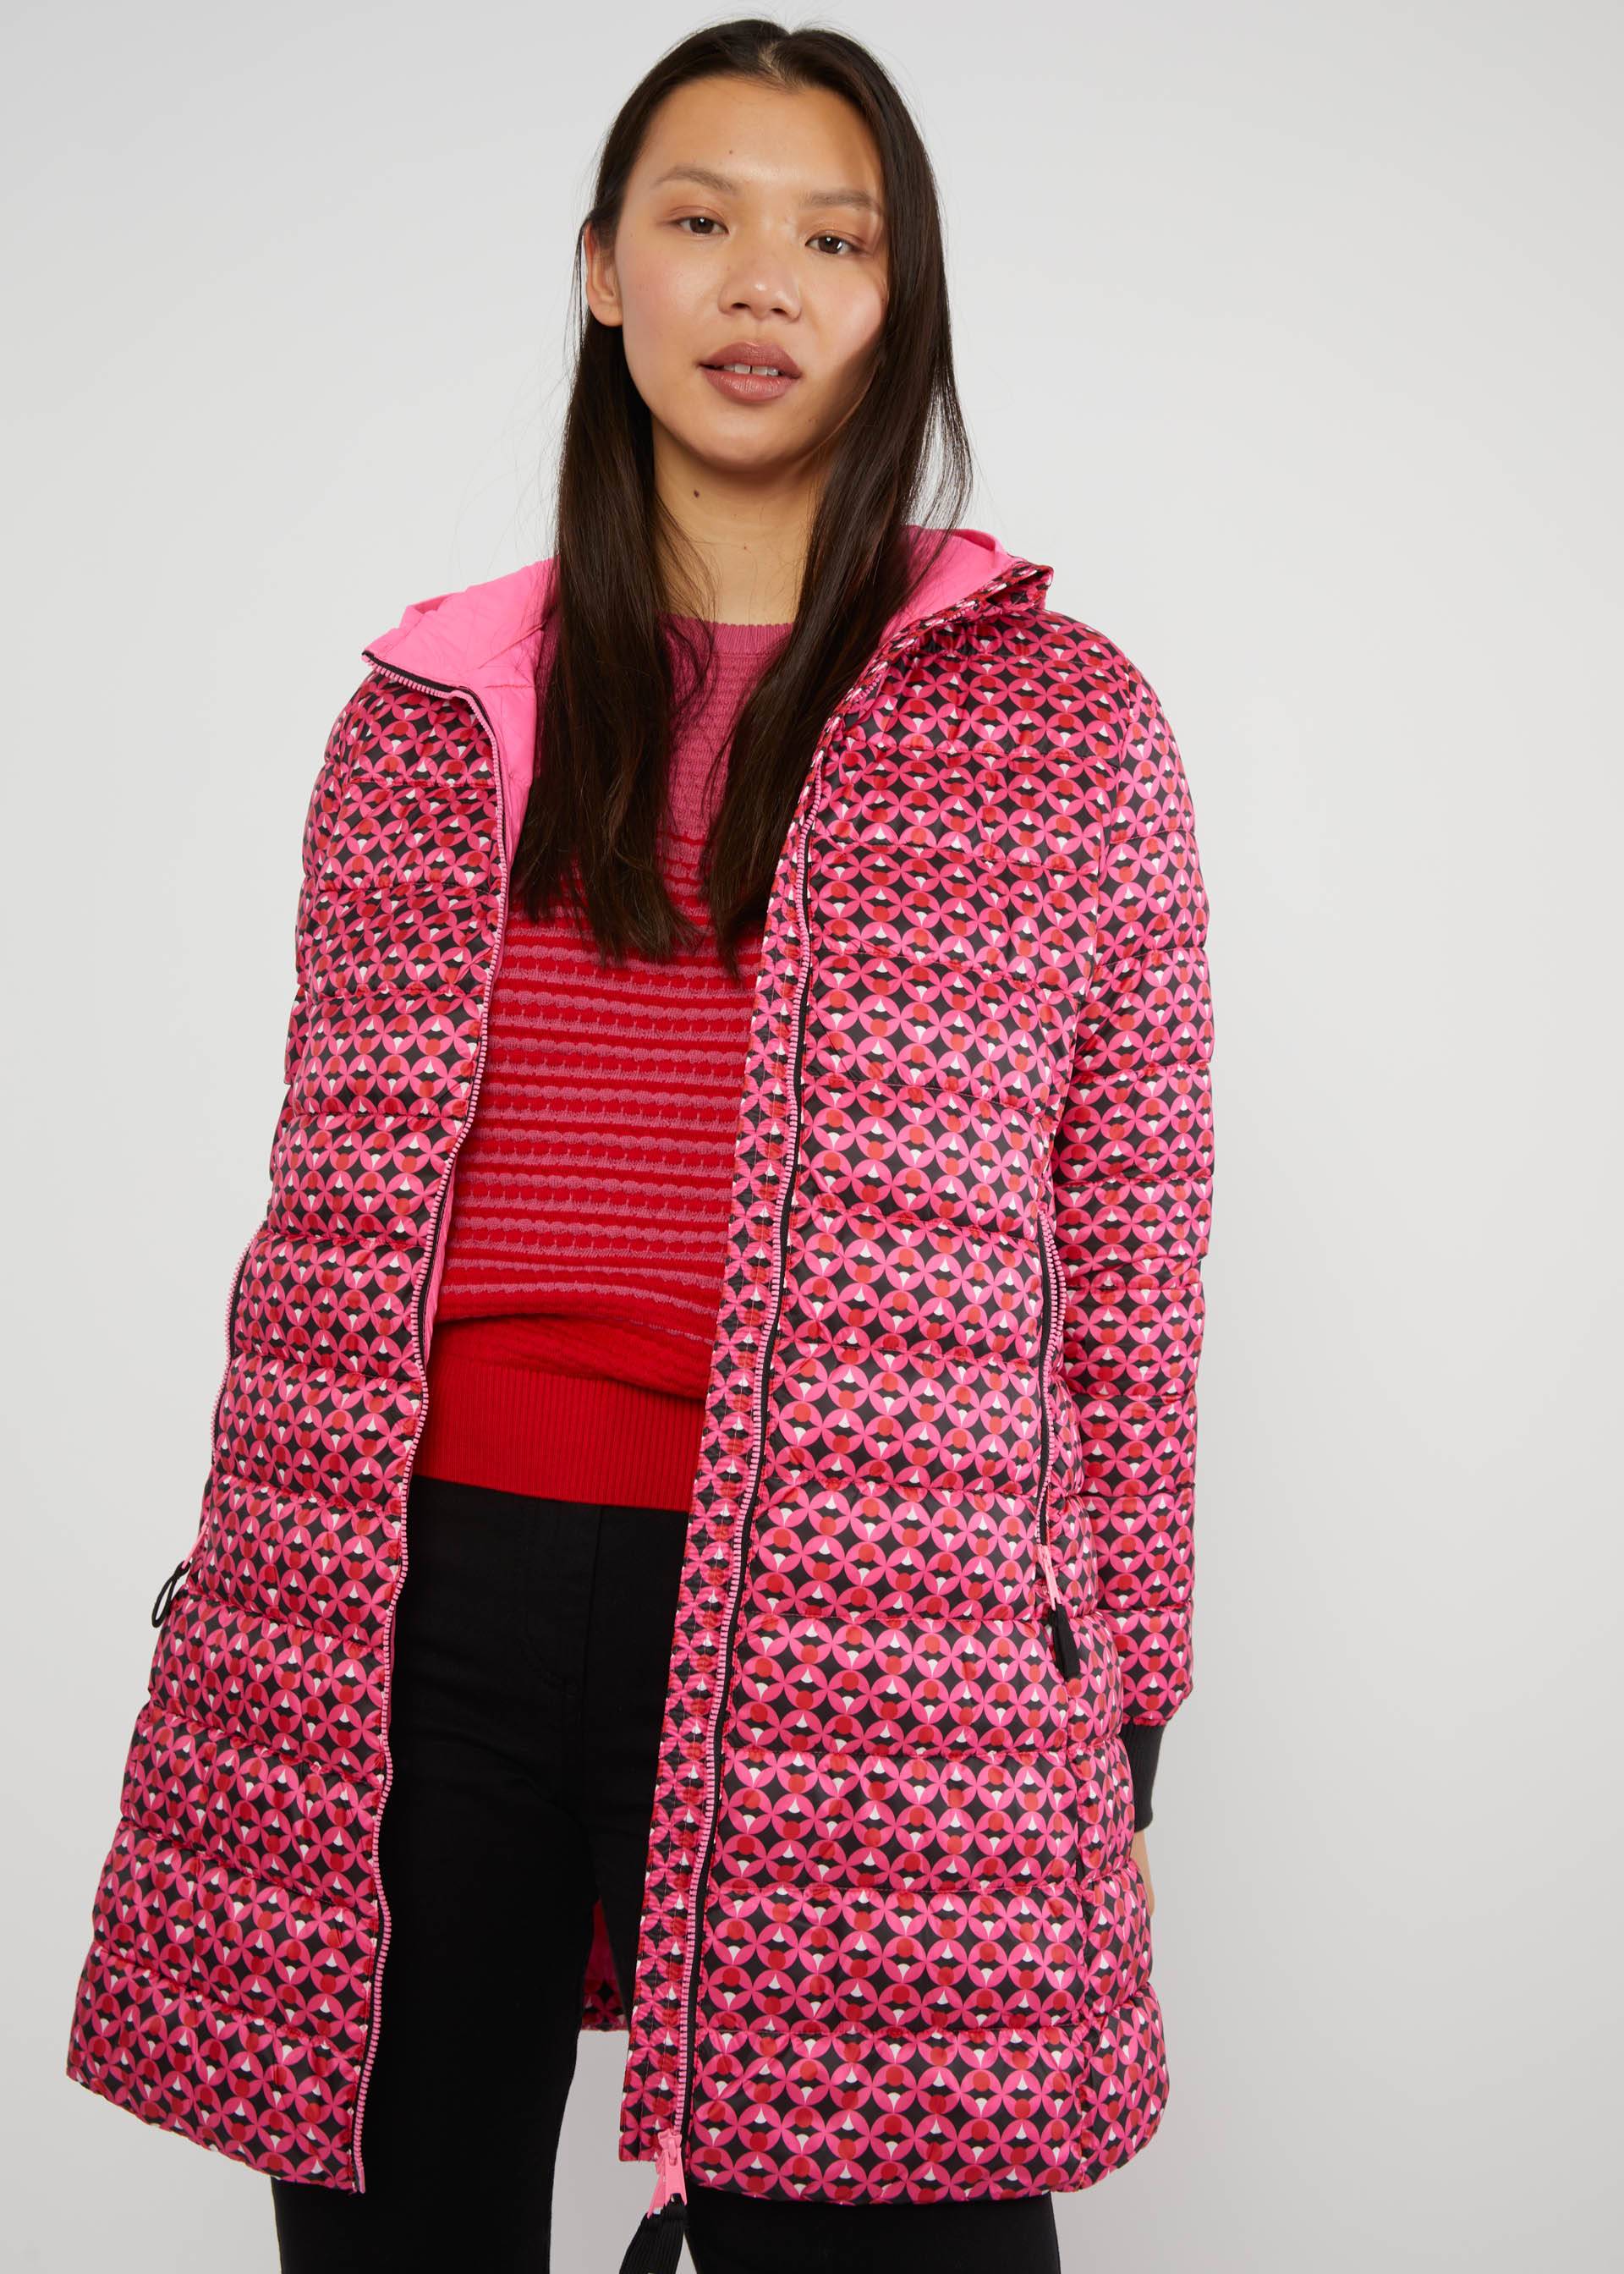 Quilted Jacket Luft und Liebe Long, smooching hanky-panky, Jackets & Coats, Pink